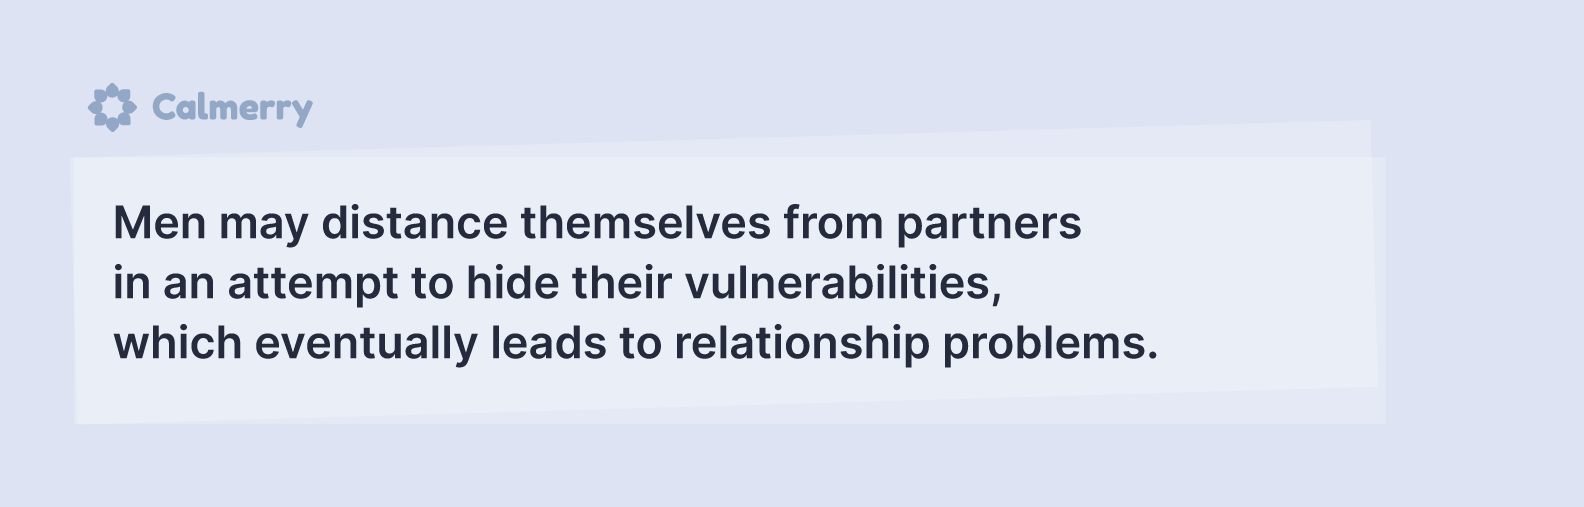 Hiding vulnerabilities from your partner may lead to problems